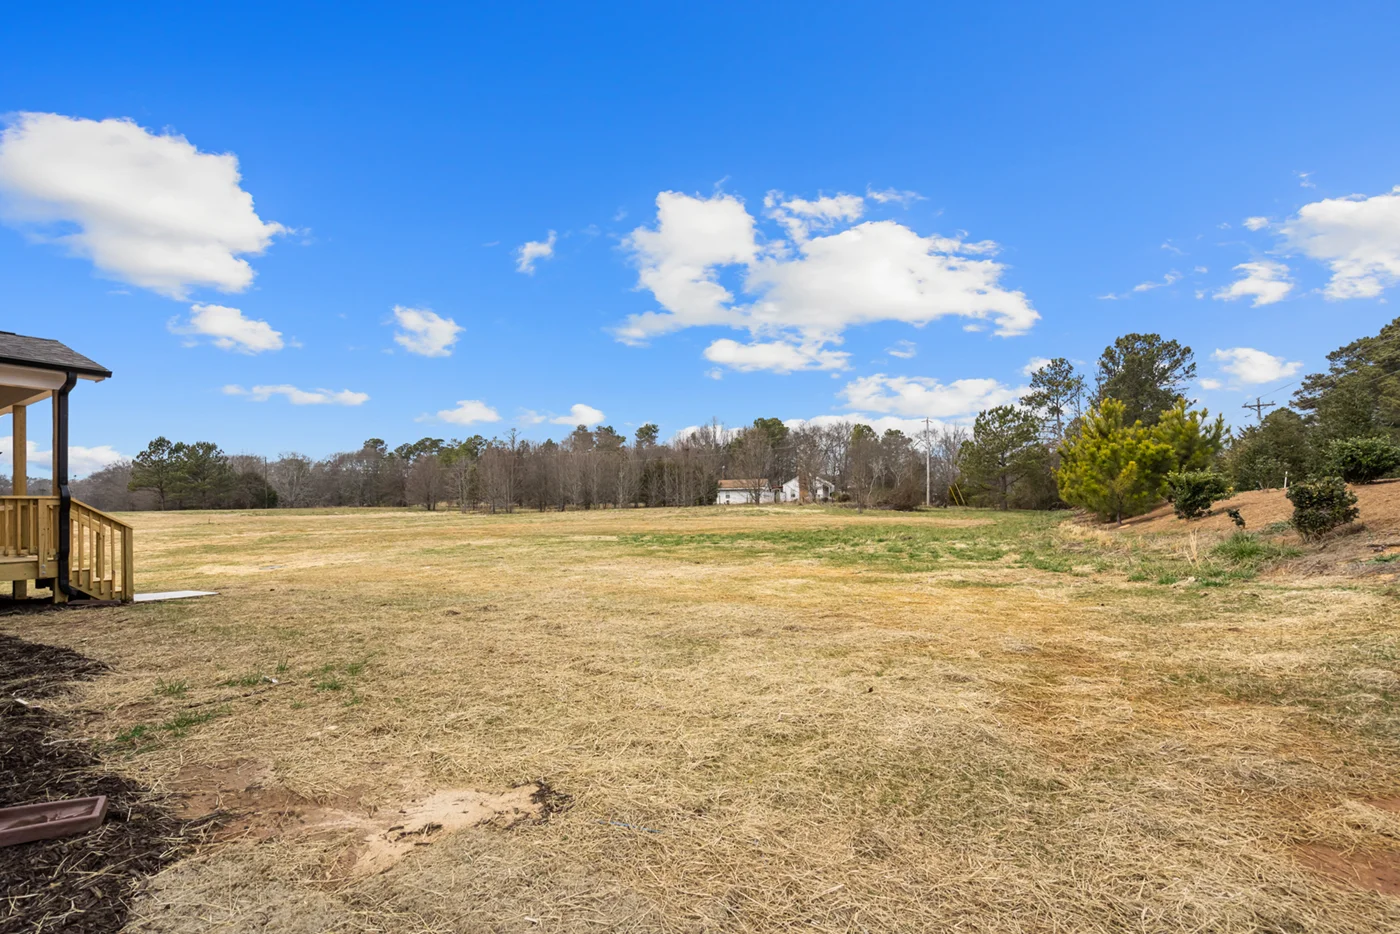 1060 Stonewood Field Rd. Watkinsville, GA | Stonewood Community | Single-Family Home for Sale by SR Homes | Stonewood Community | Single-Family Home for Sale by SR Homes